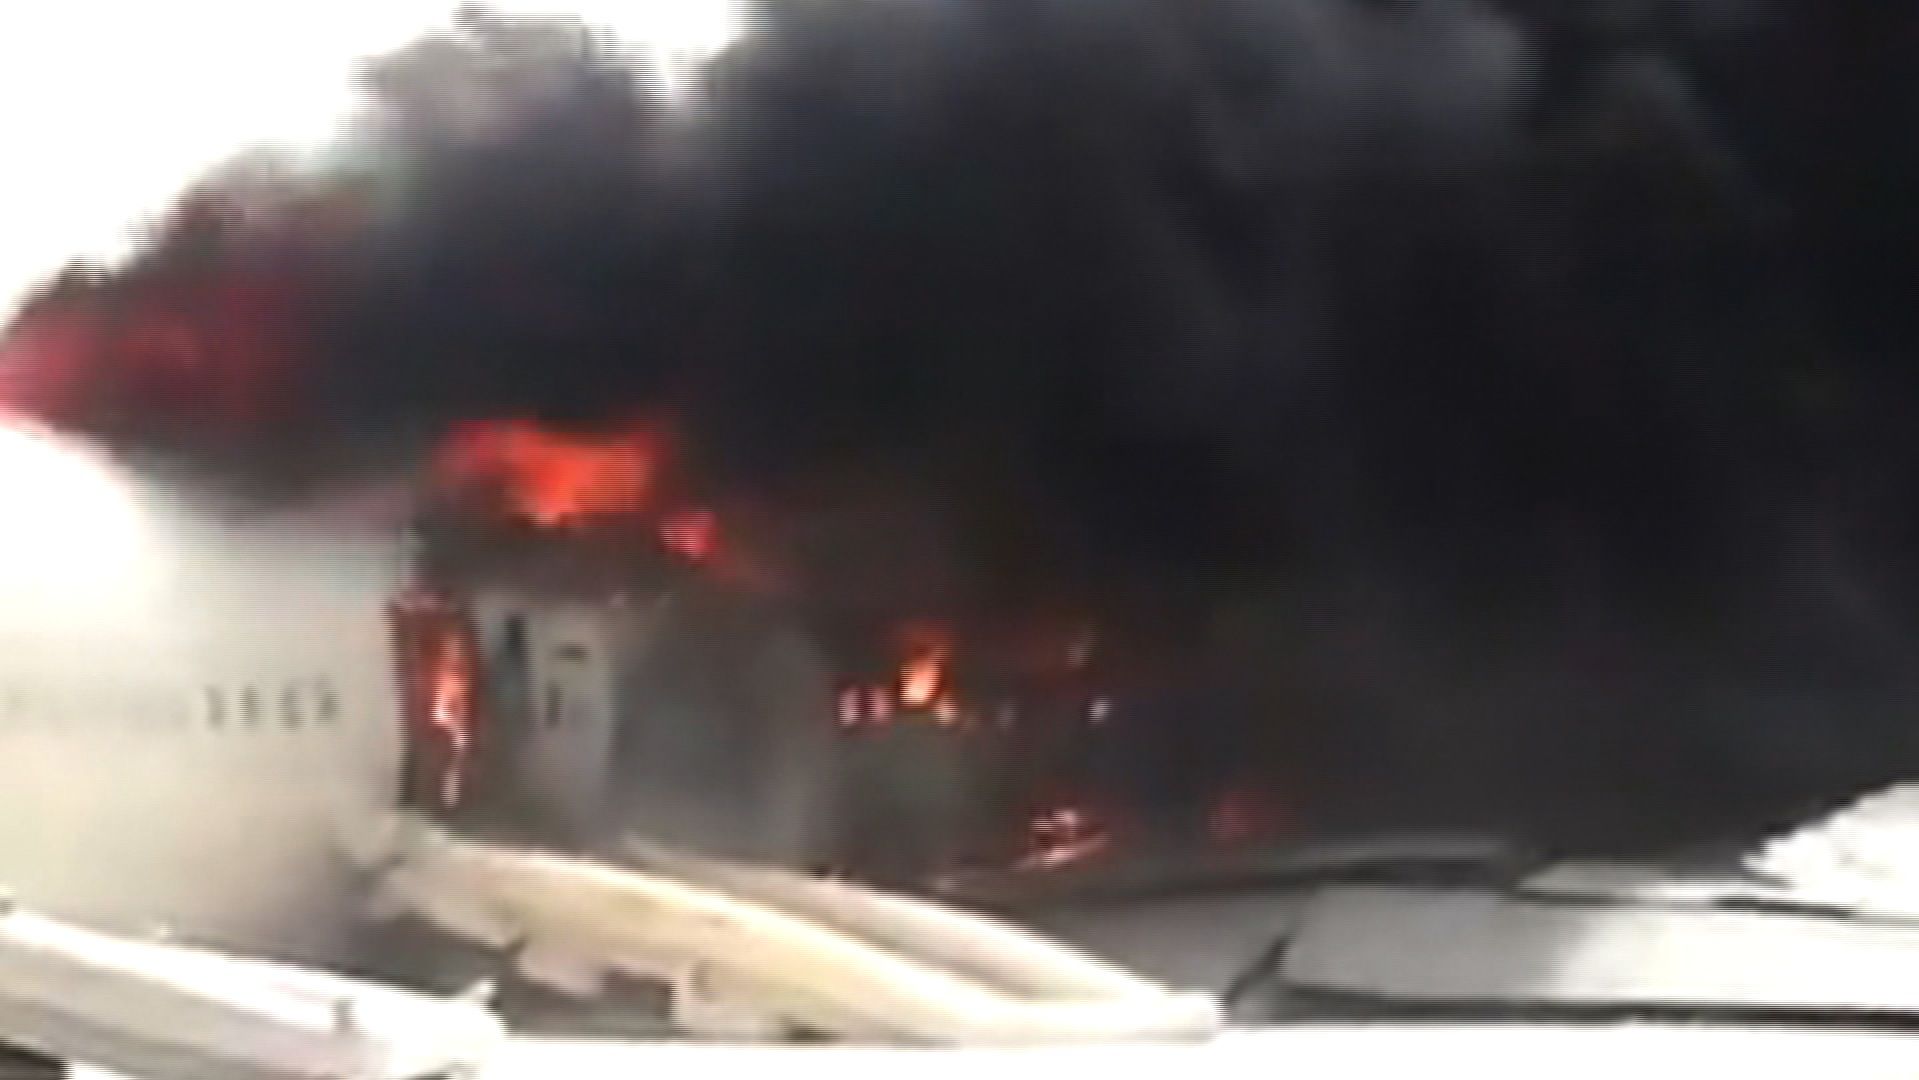 Flames engulfed the plane after all 300 people on board escaped.